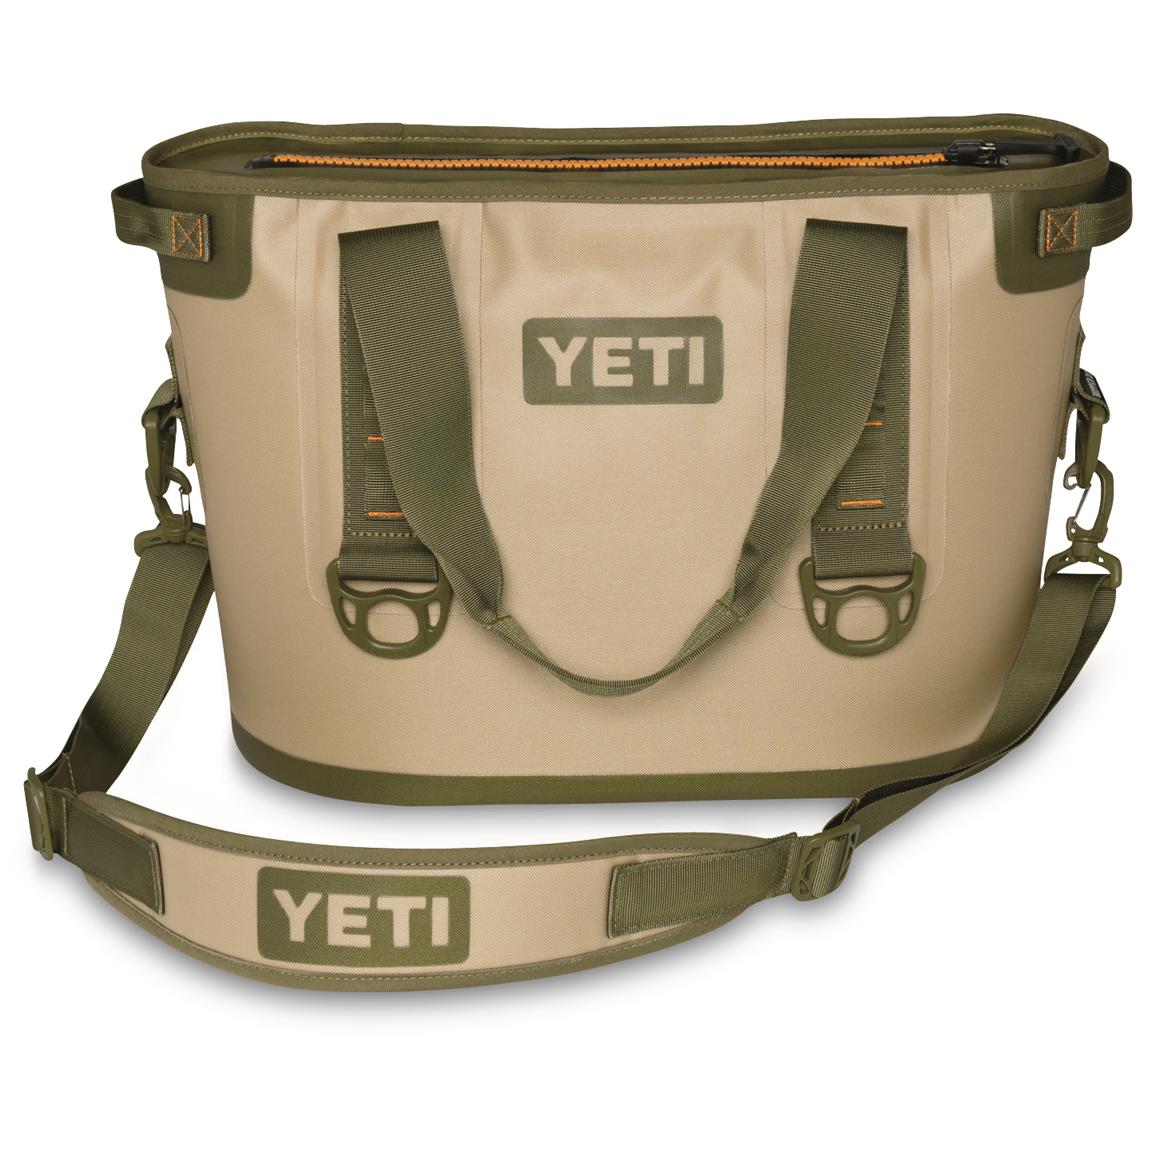 YETI Hopper 20 Soft Cooler - 690416, Coolers at Sportsman's Guide